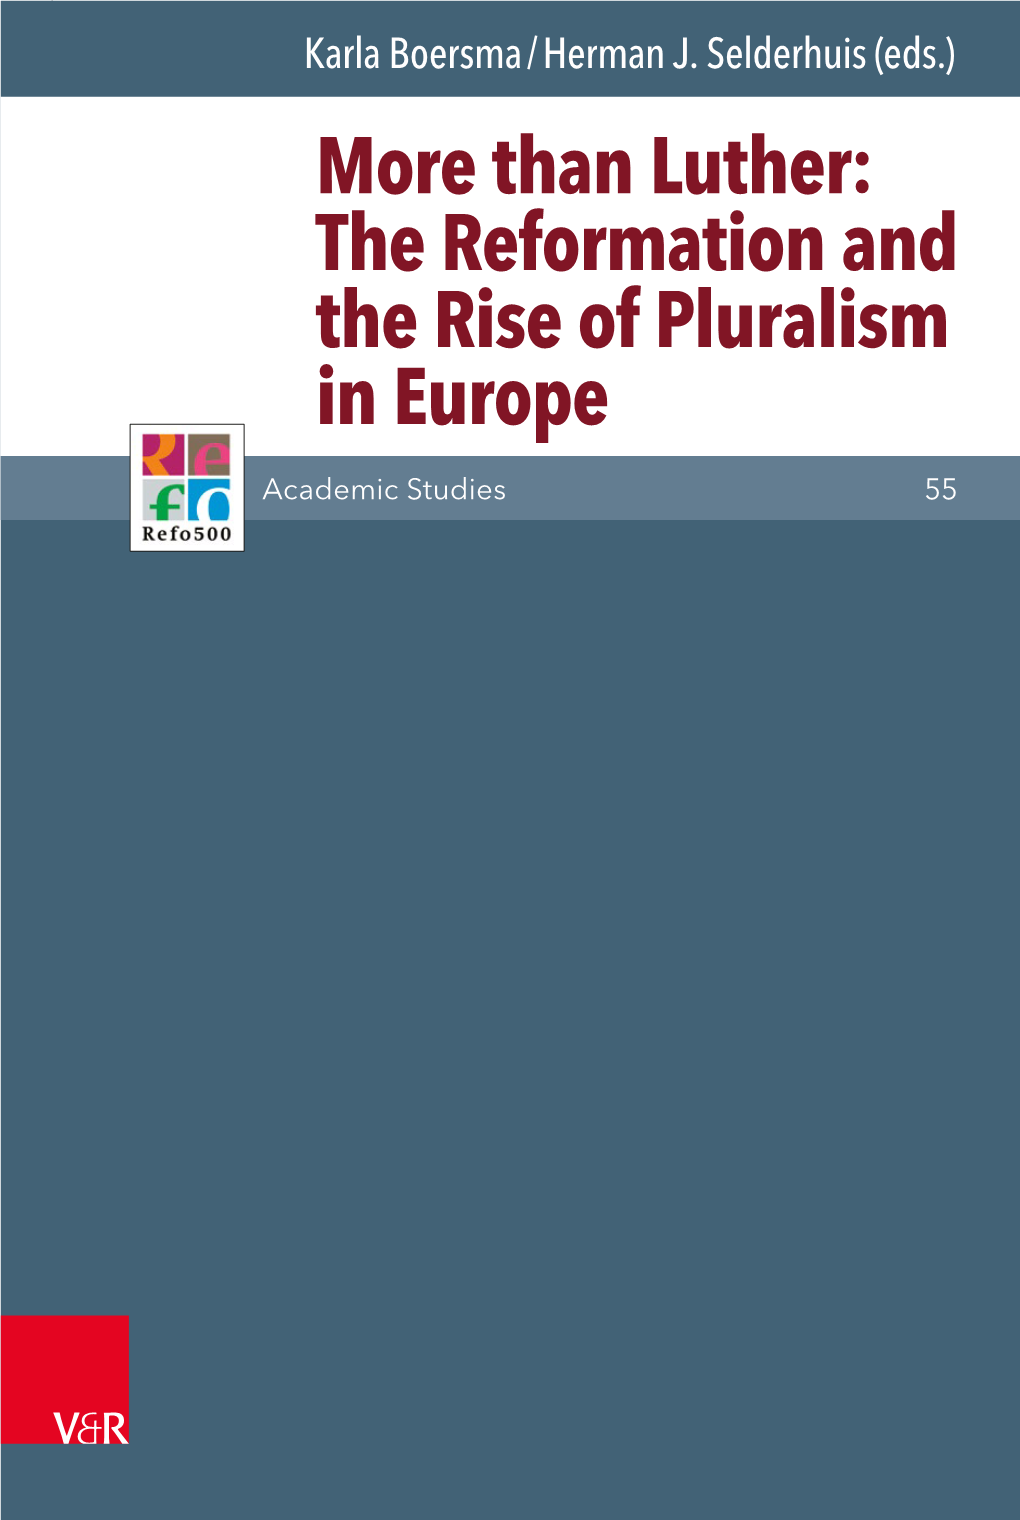 Than Luther: the Reformation and the Rise of Pluralism in Europe